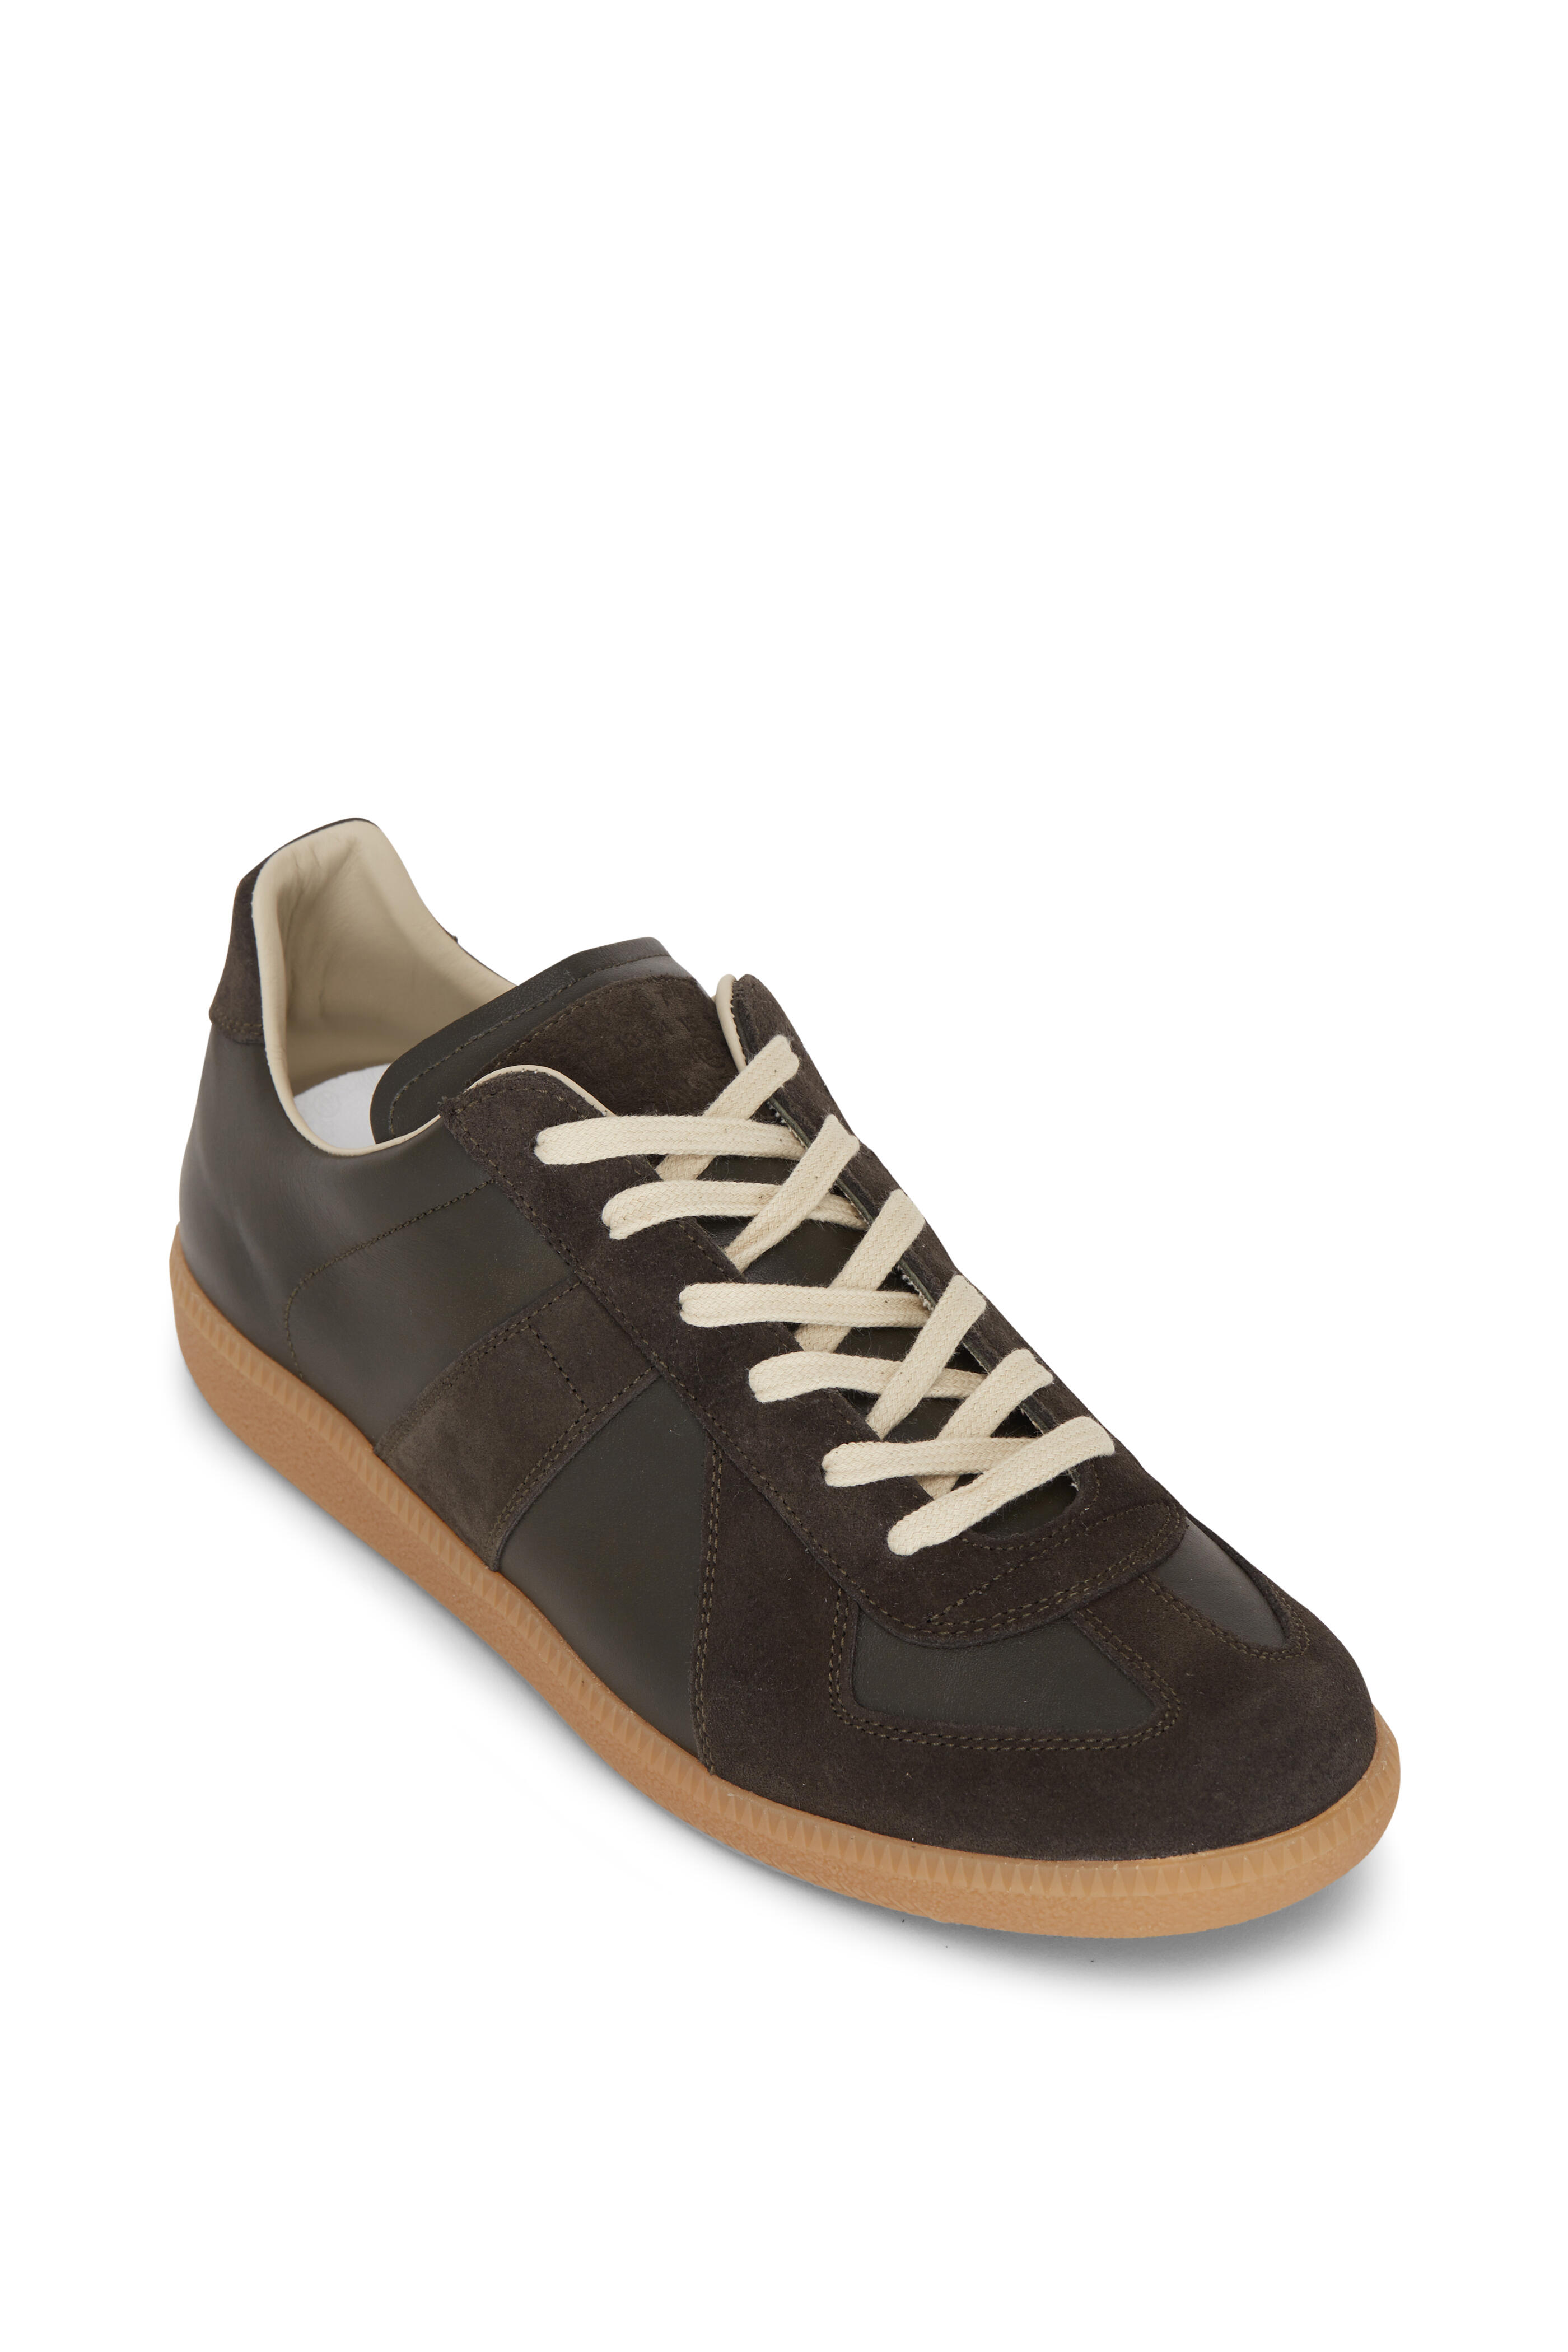 Maison Margiela - Replica Olive Suede & Leather Low Top Sneaker